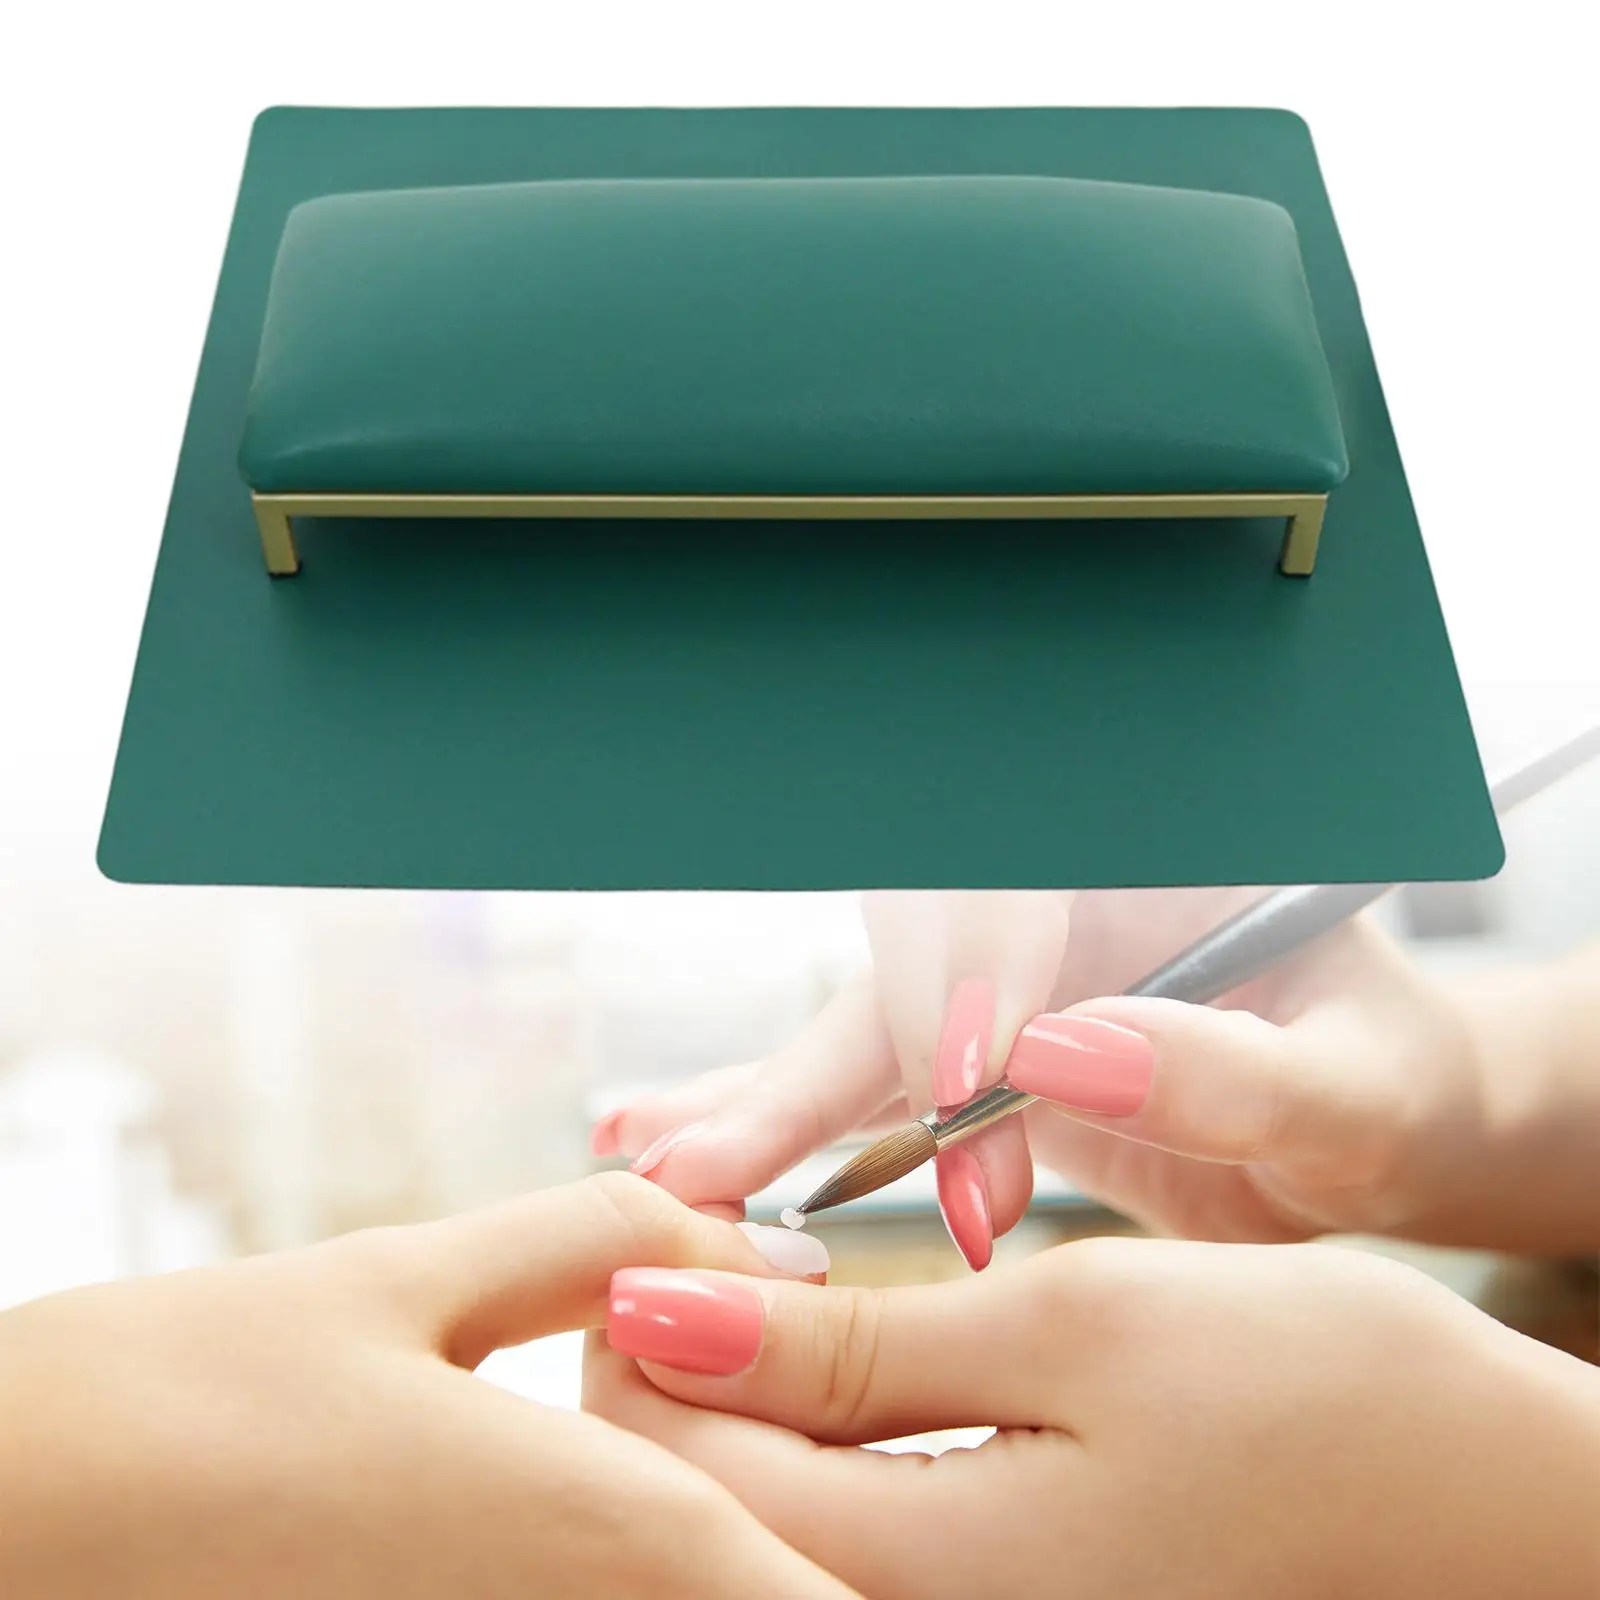 Nail Hand Pillow Accessories PU Leather Comfortable Hand Cushion Nail Hand Rest Salon Accessories for Home Manicurist Salon Nail